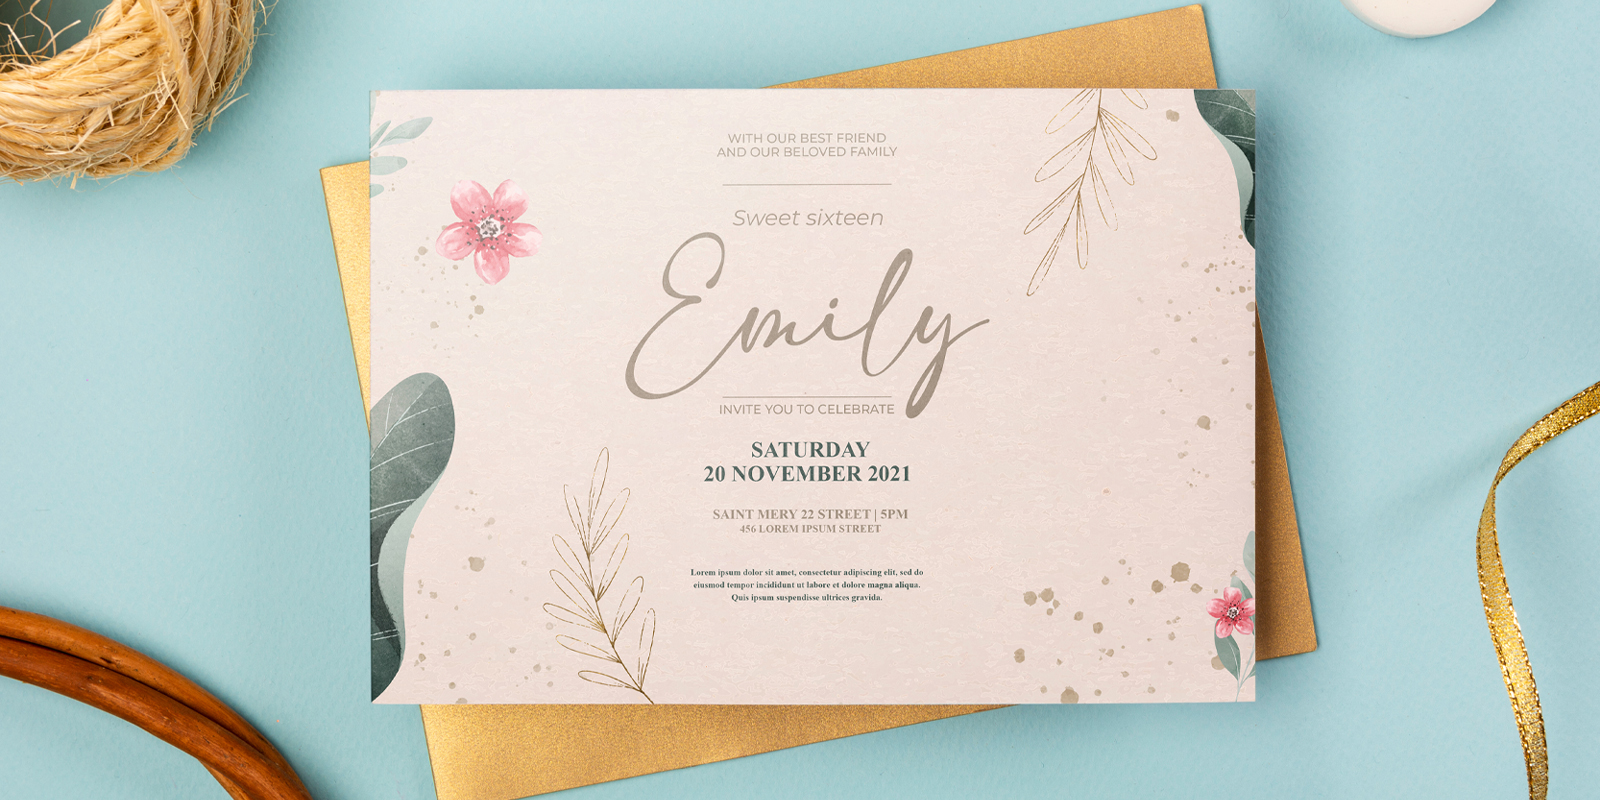 Invitations in Bendigo - Print with Pagerr